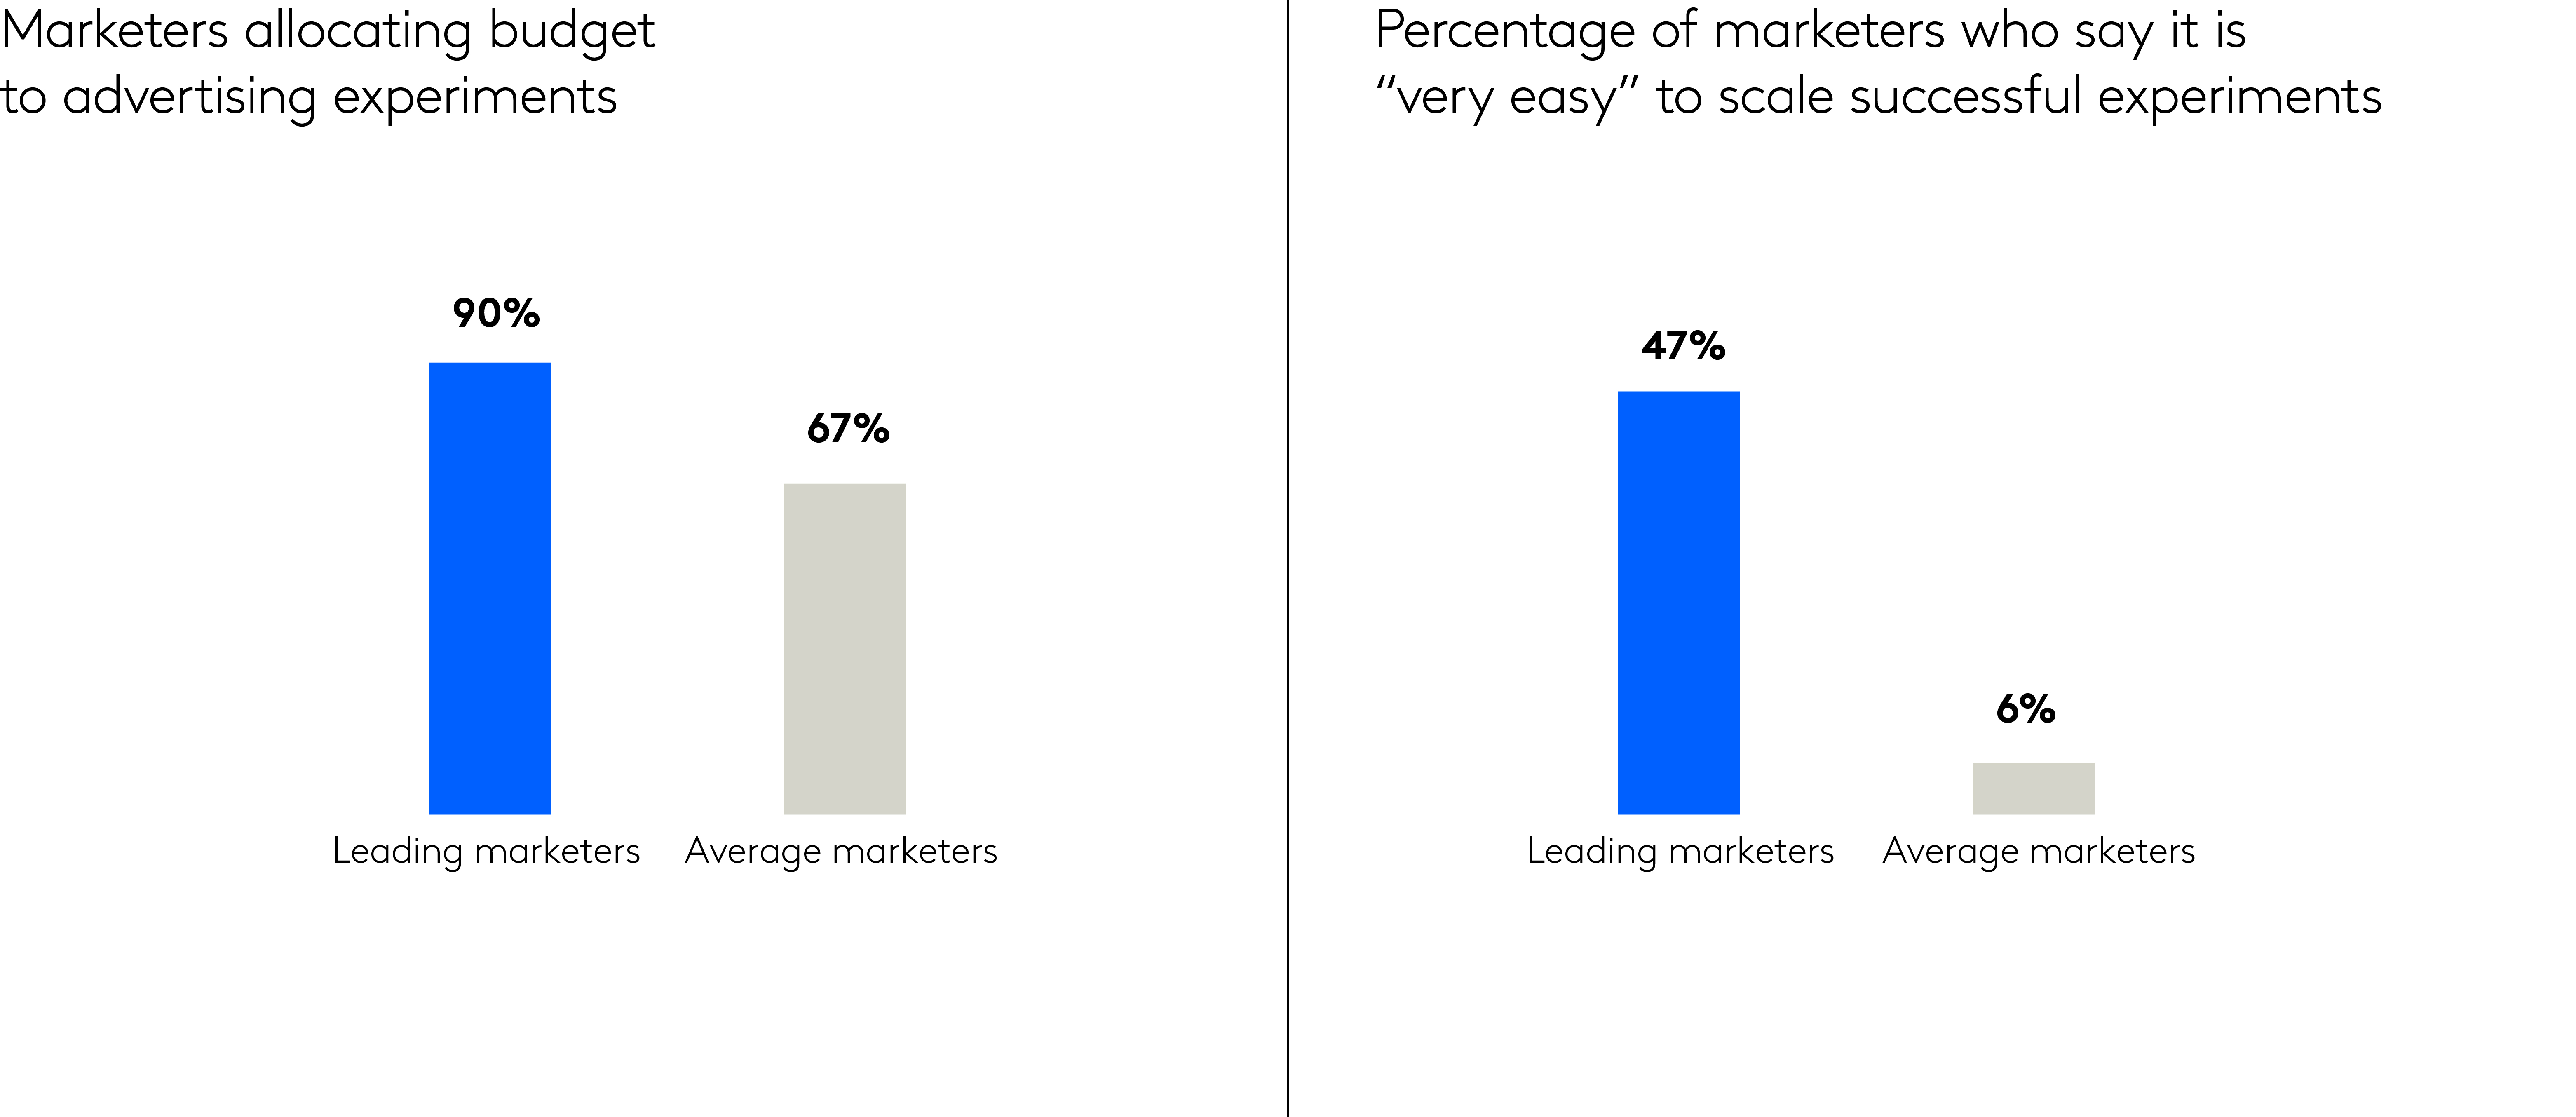 leading marketers